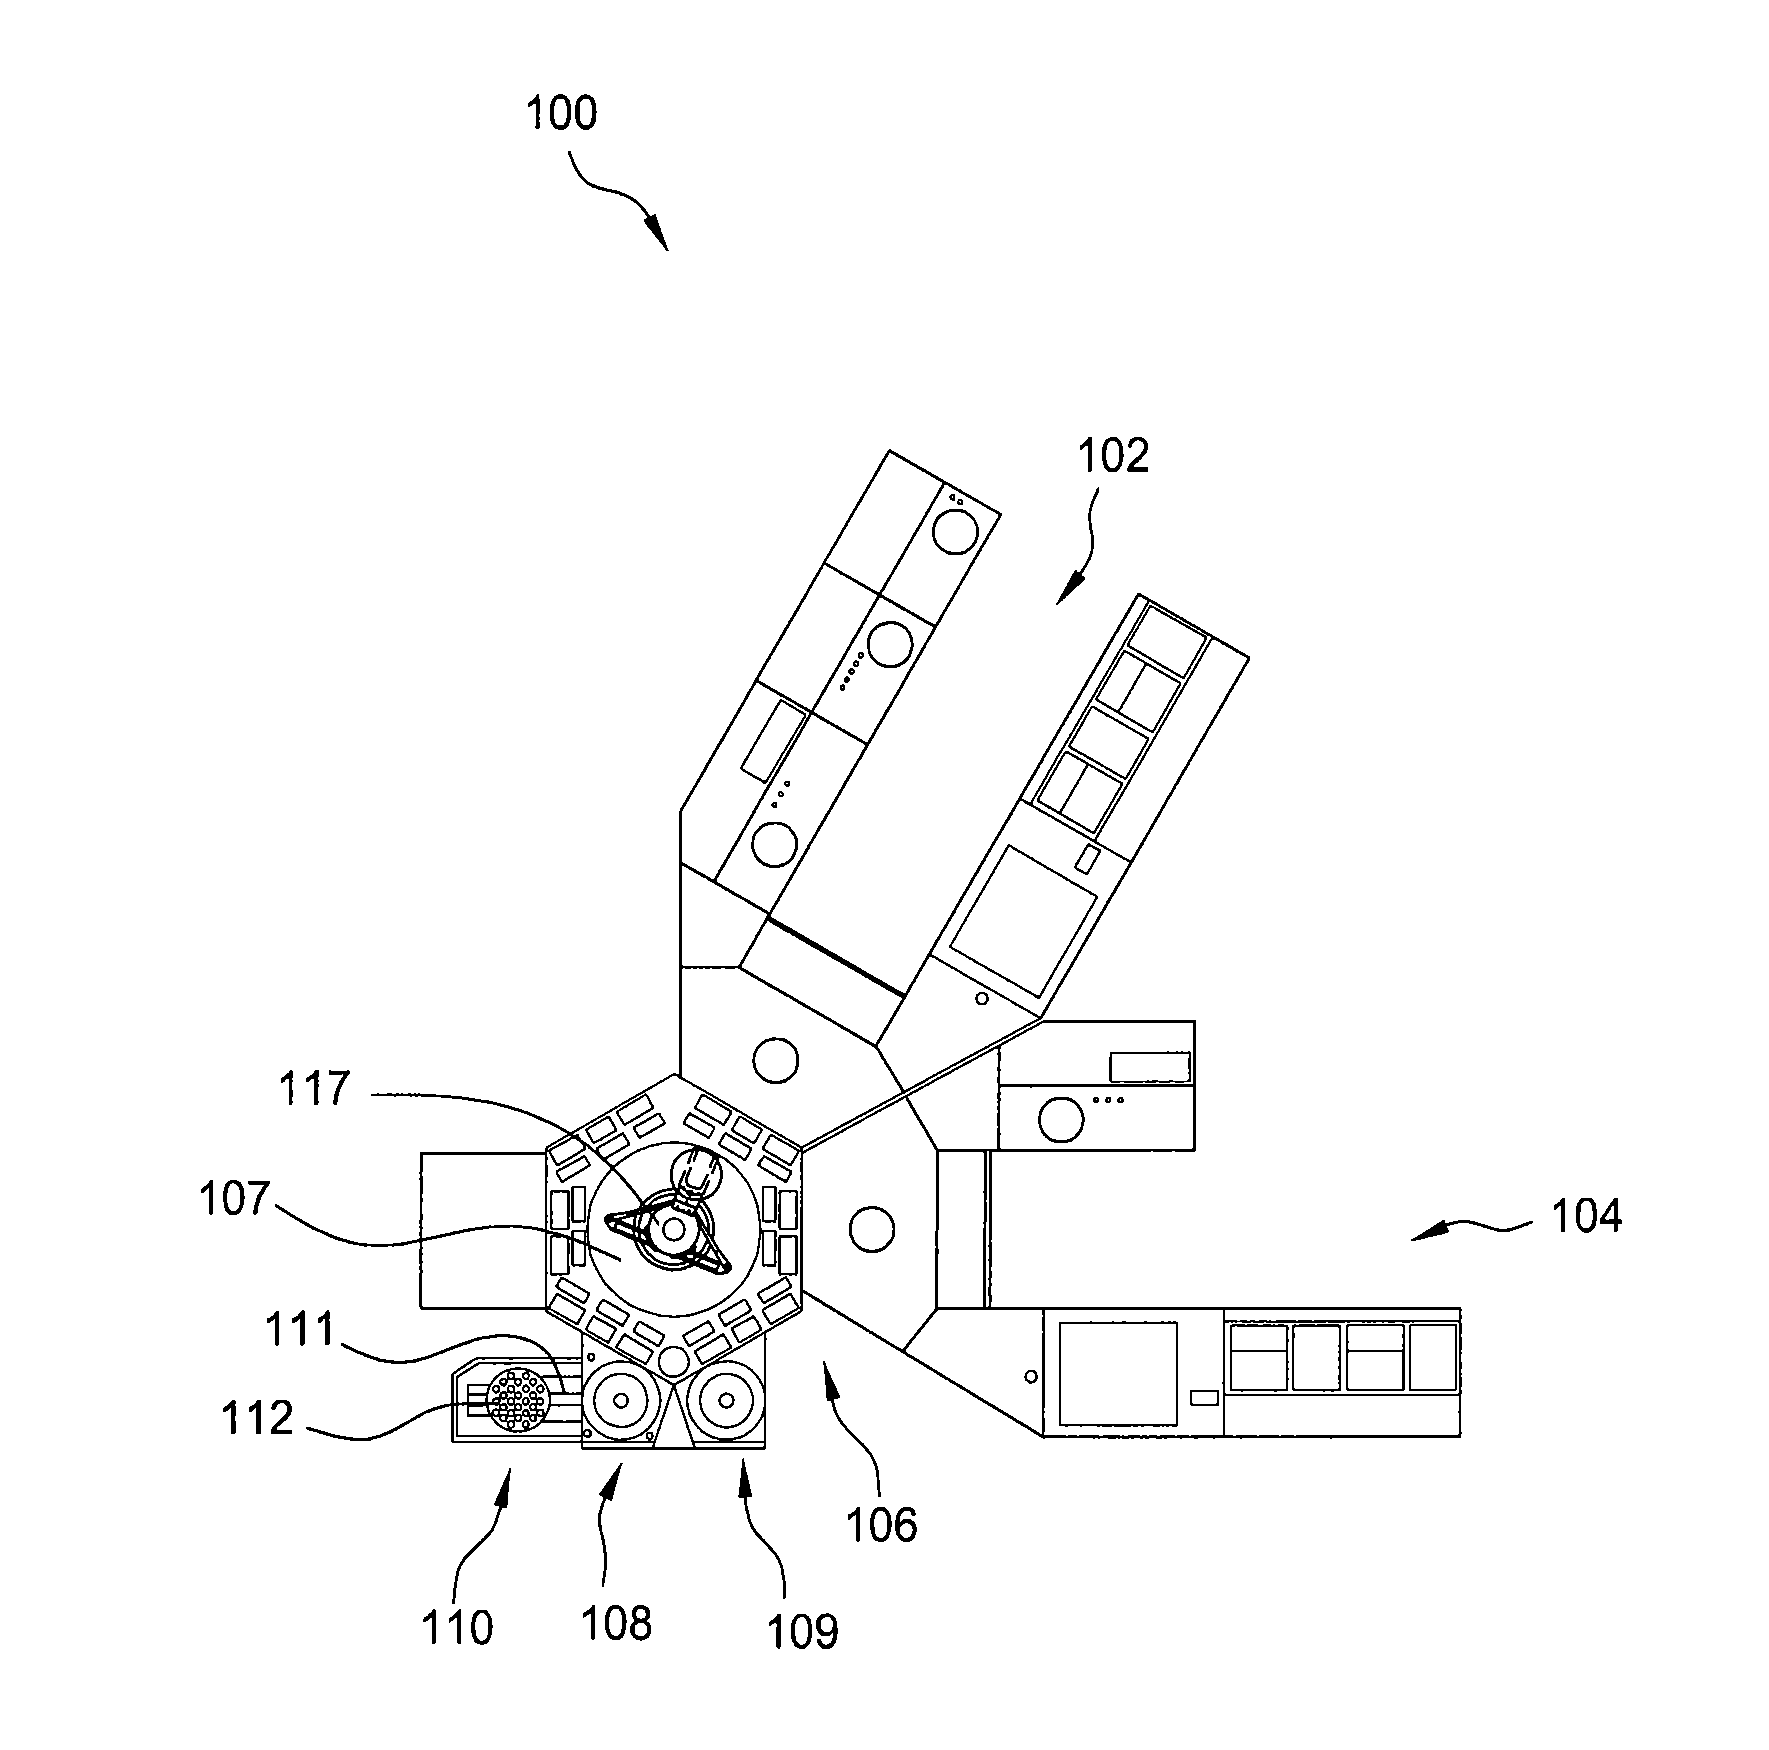 Substrate transfer mechanism with preheating features